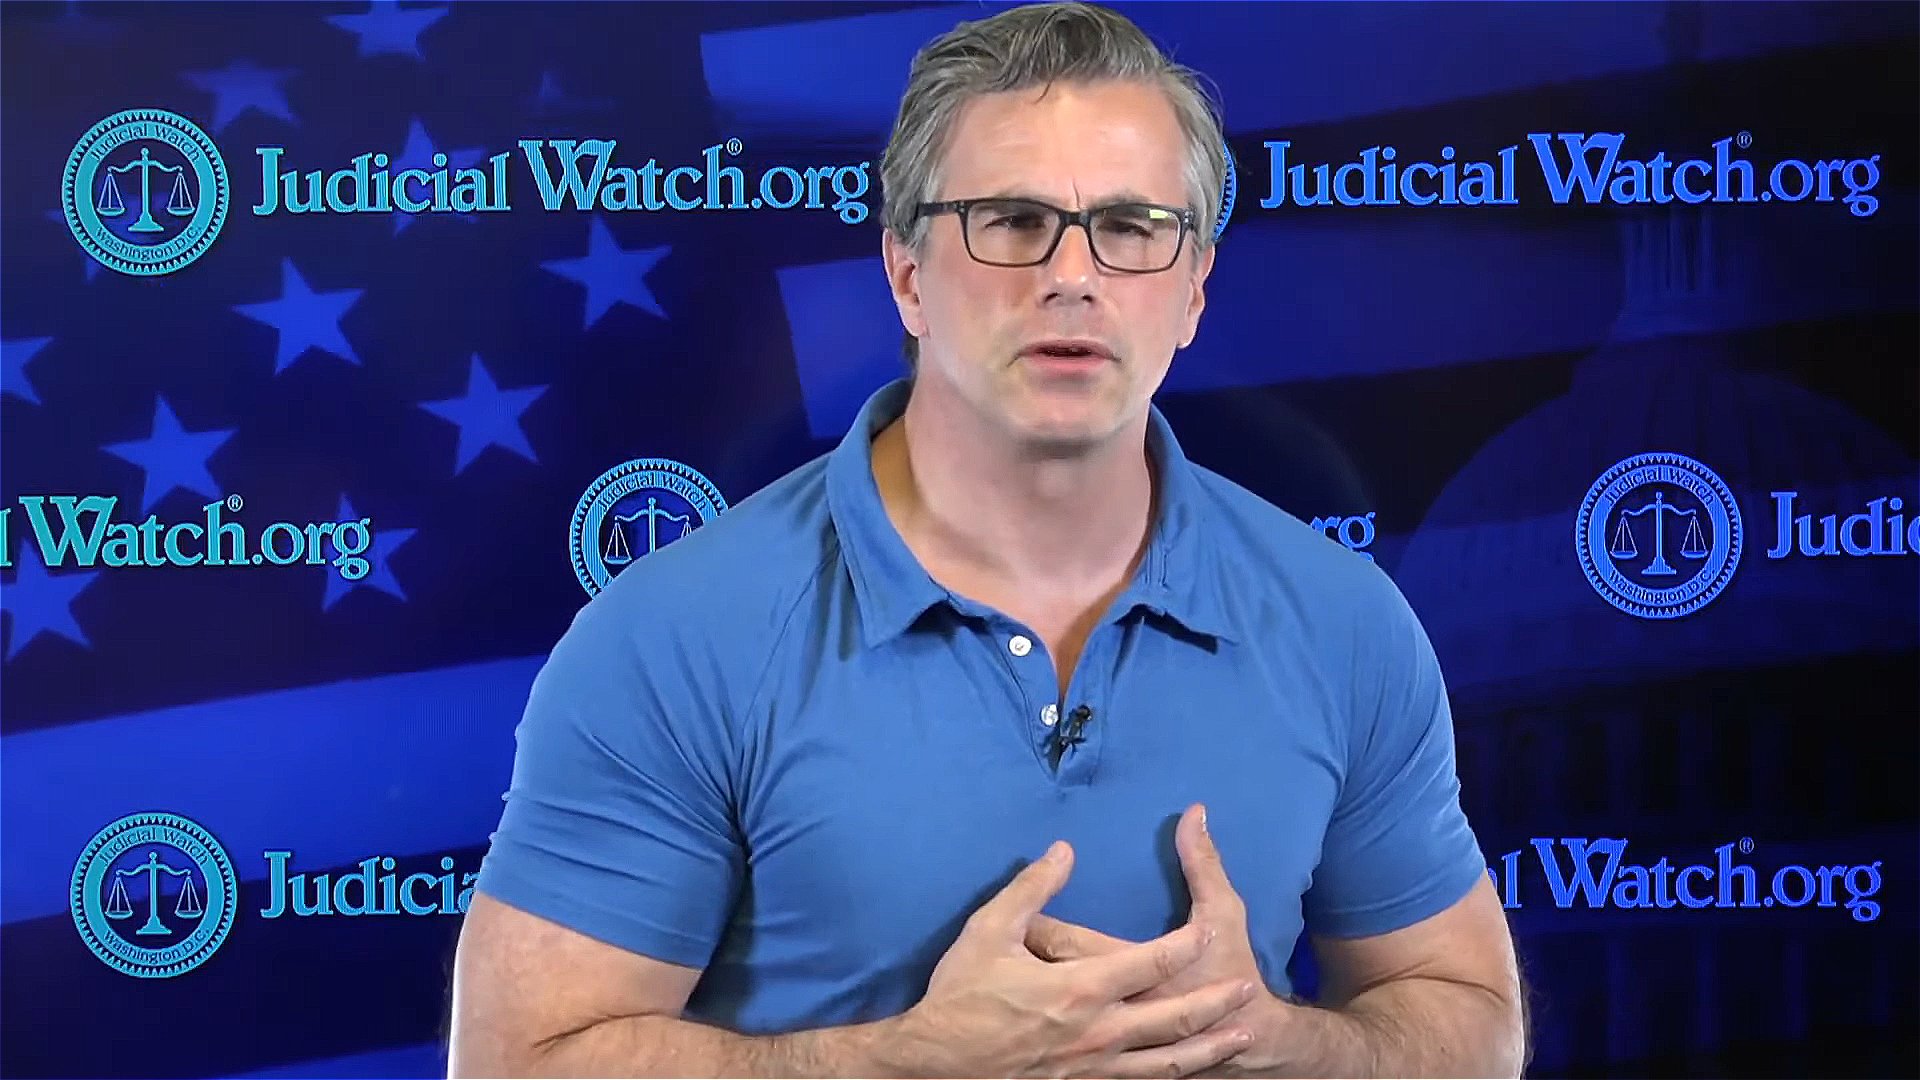 Judicial Watch Exposed the Benghazi Cover-Up by Hillary Clinton and Barack Obama